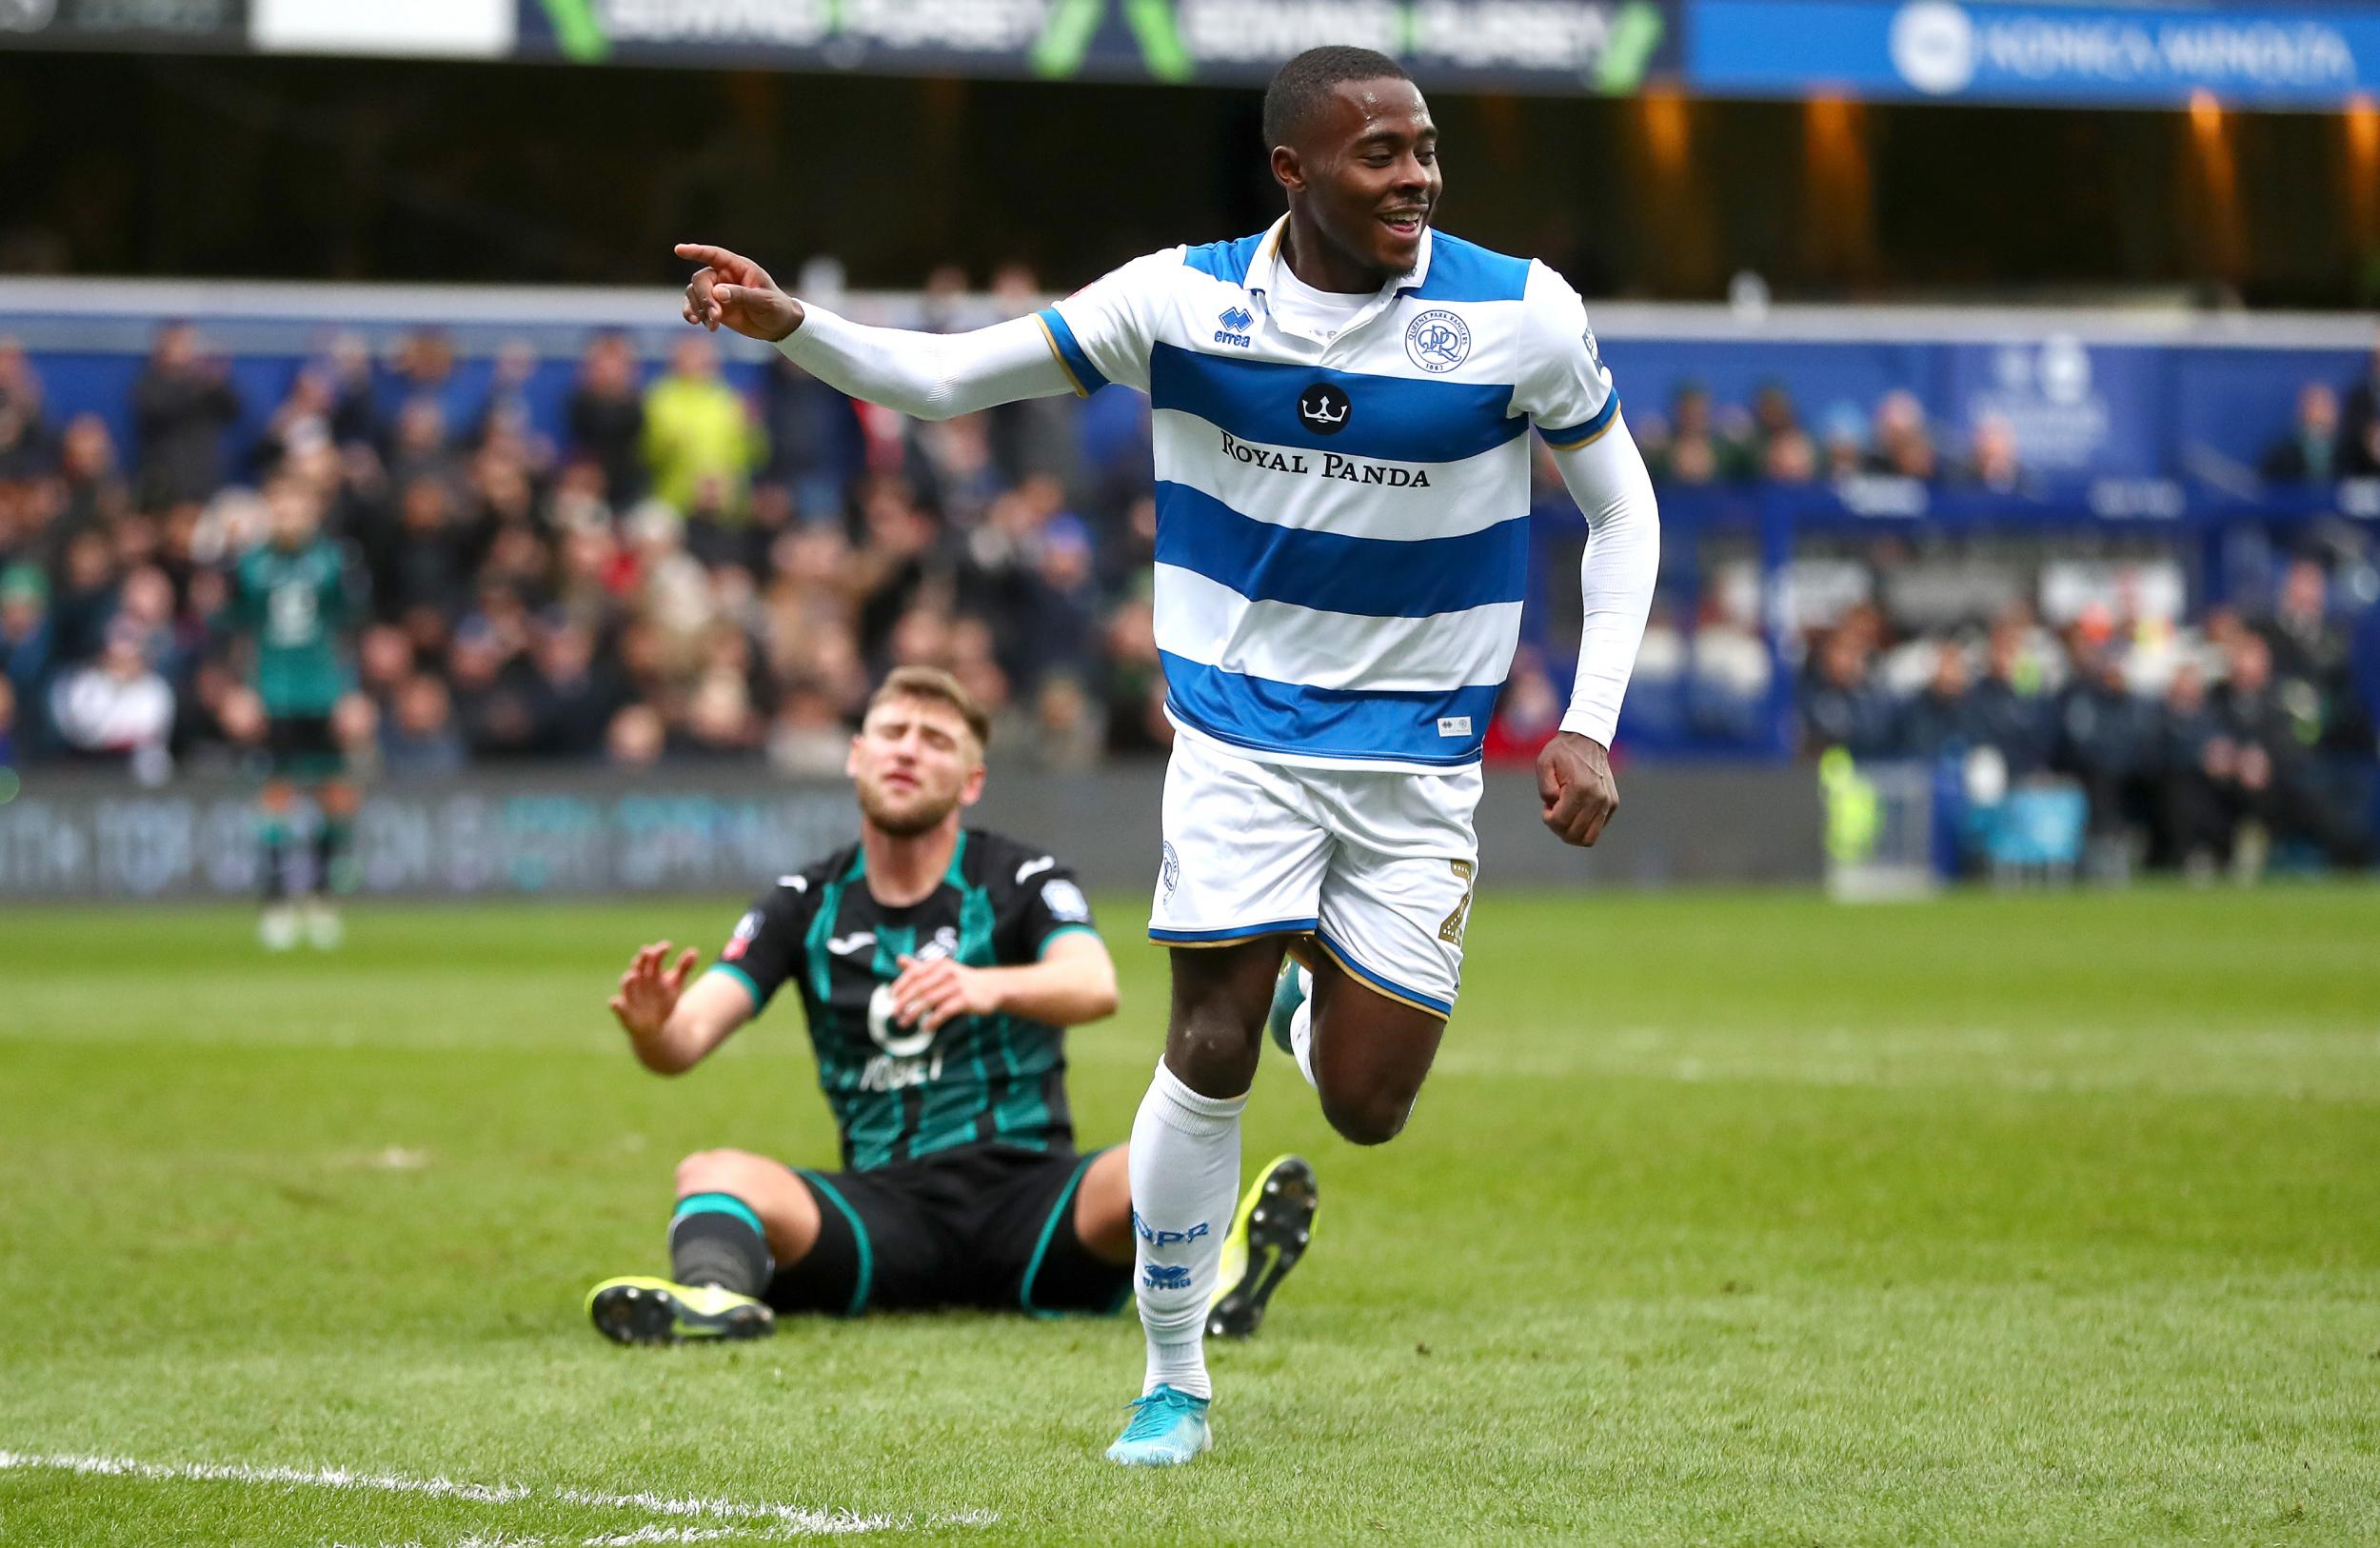 Bright Osayi-Samuel has directly contributed to 13 goals in the Championship this season